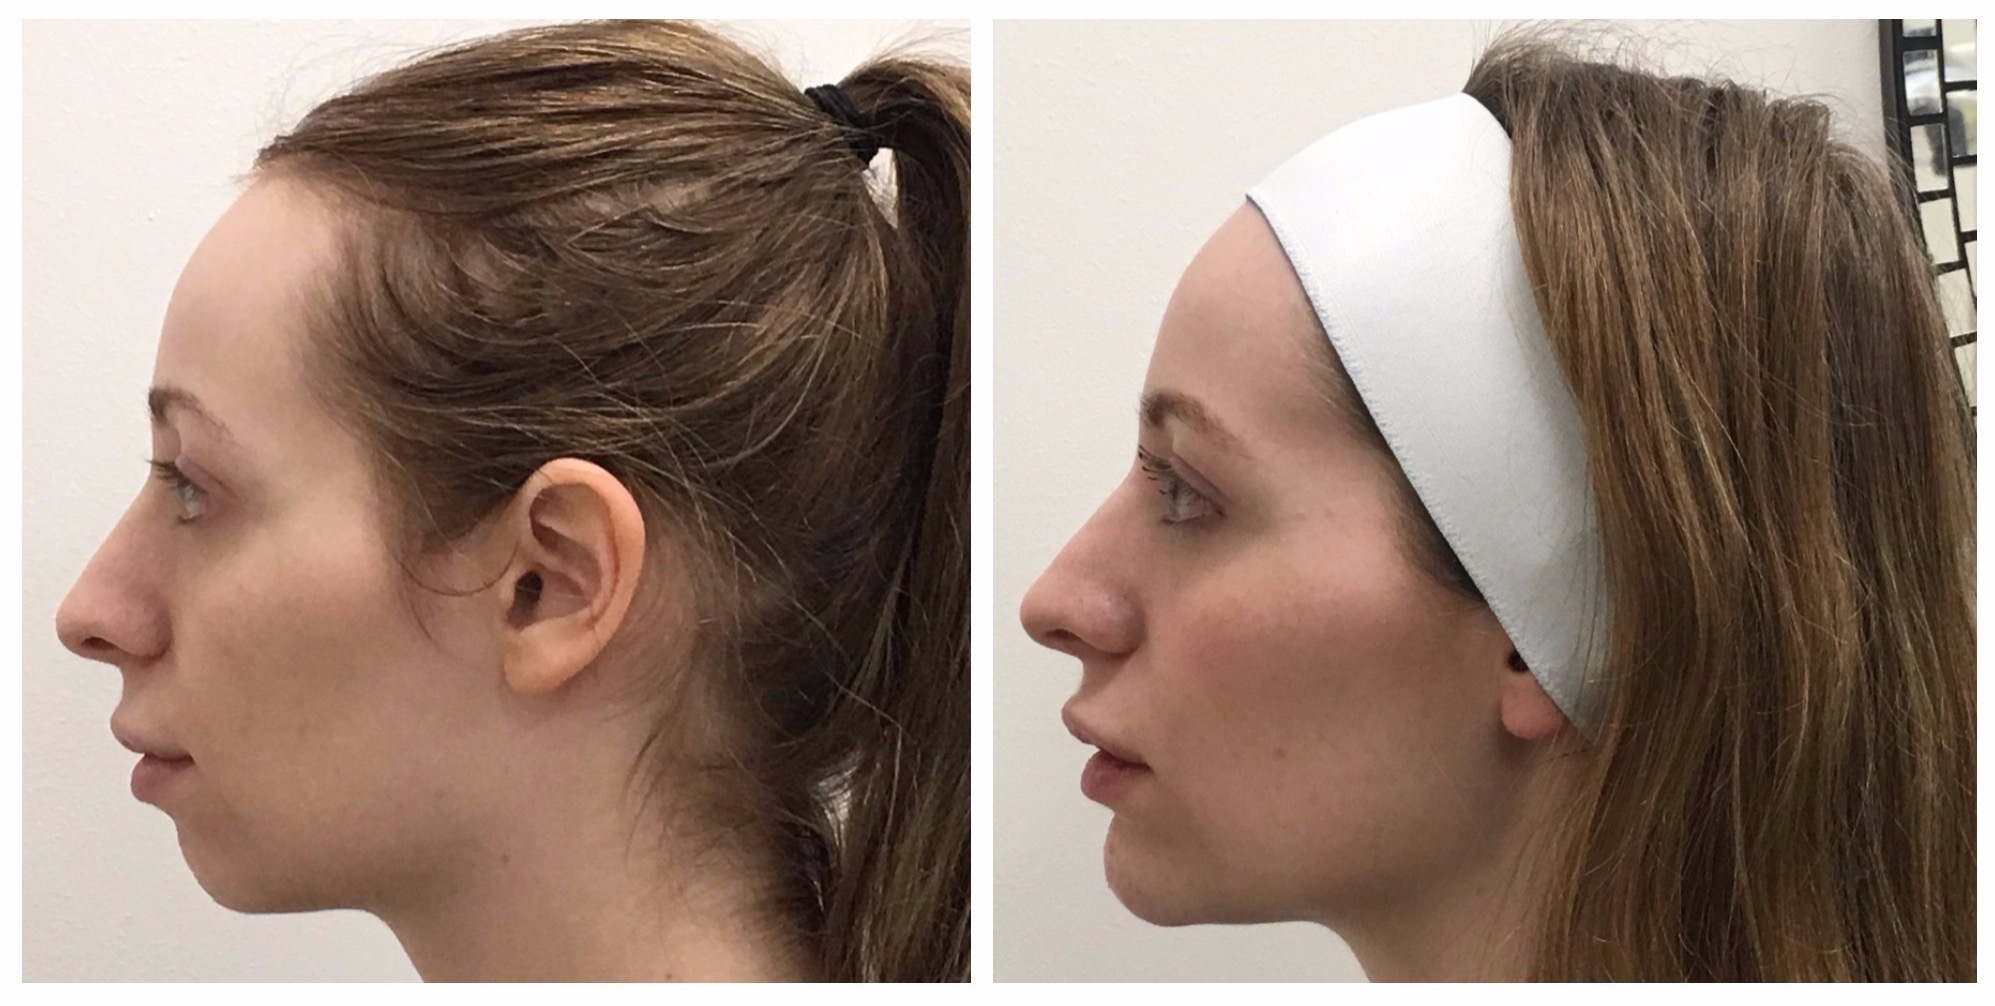 jawline augmentation/fillers - drbk cosmetic dentist